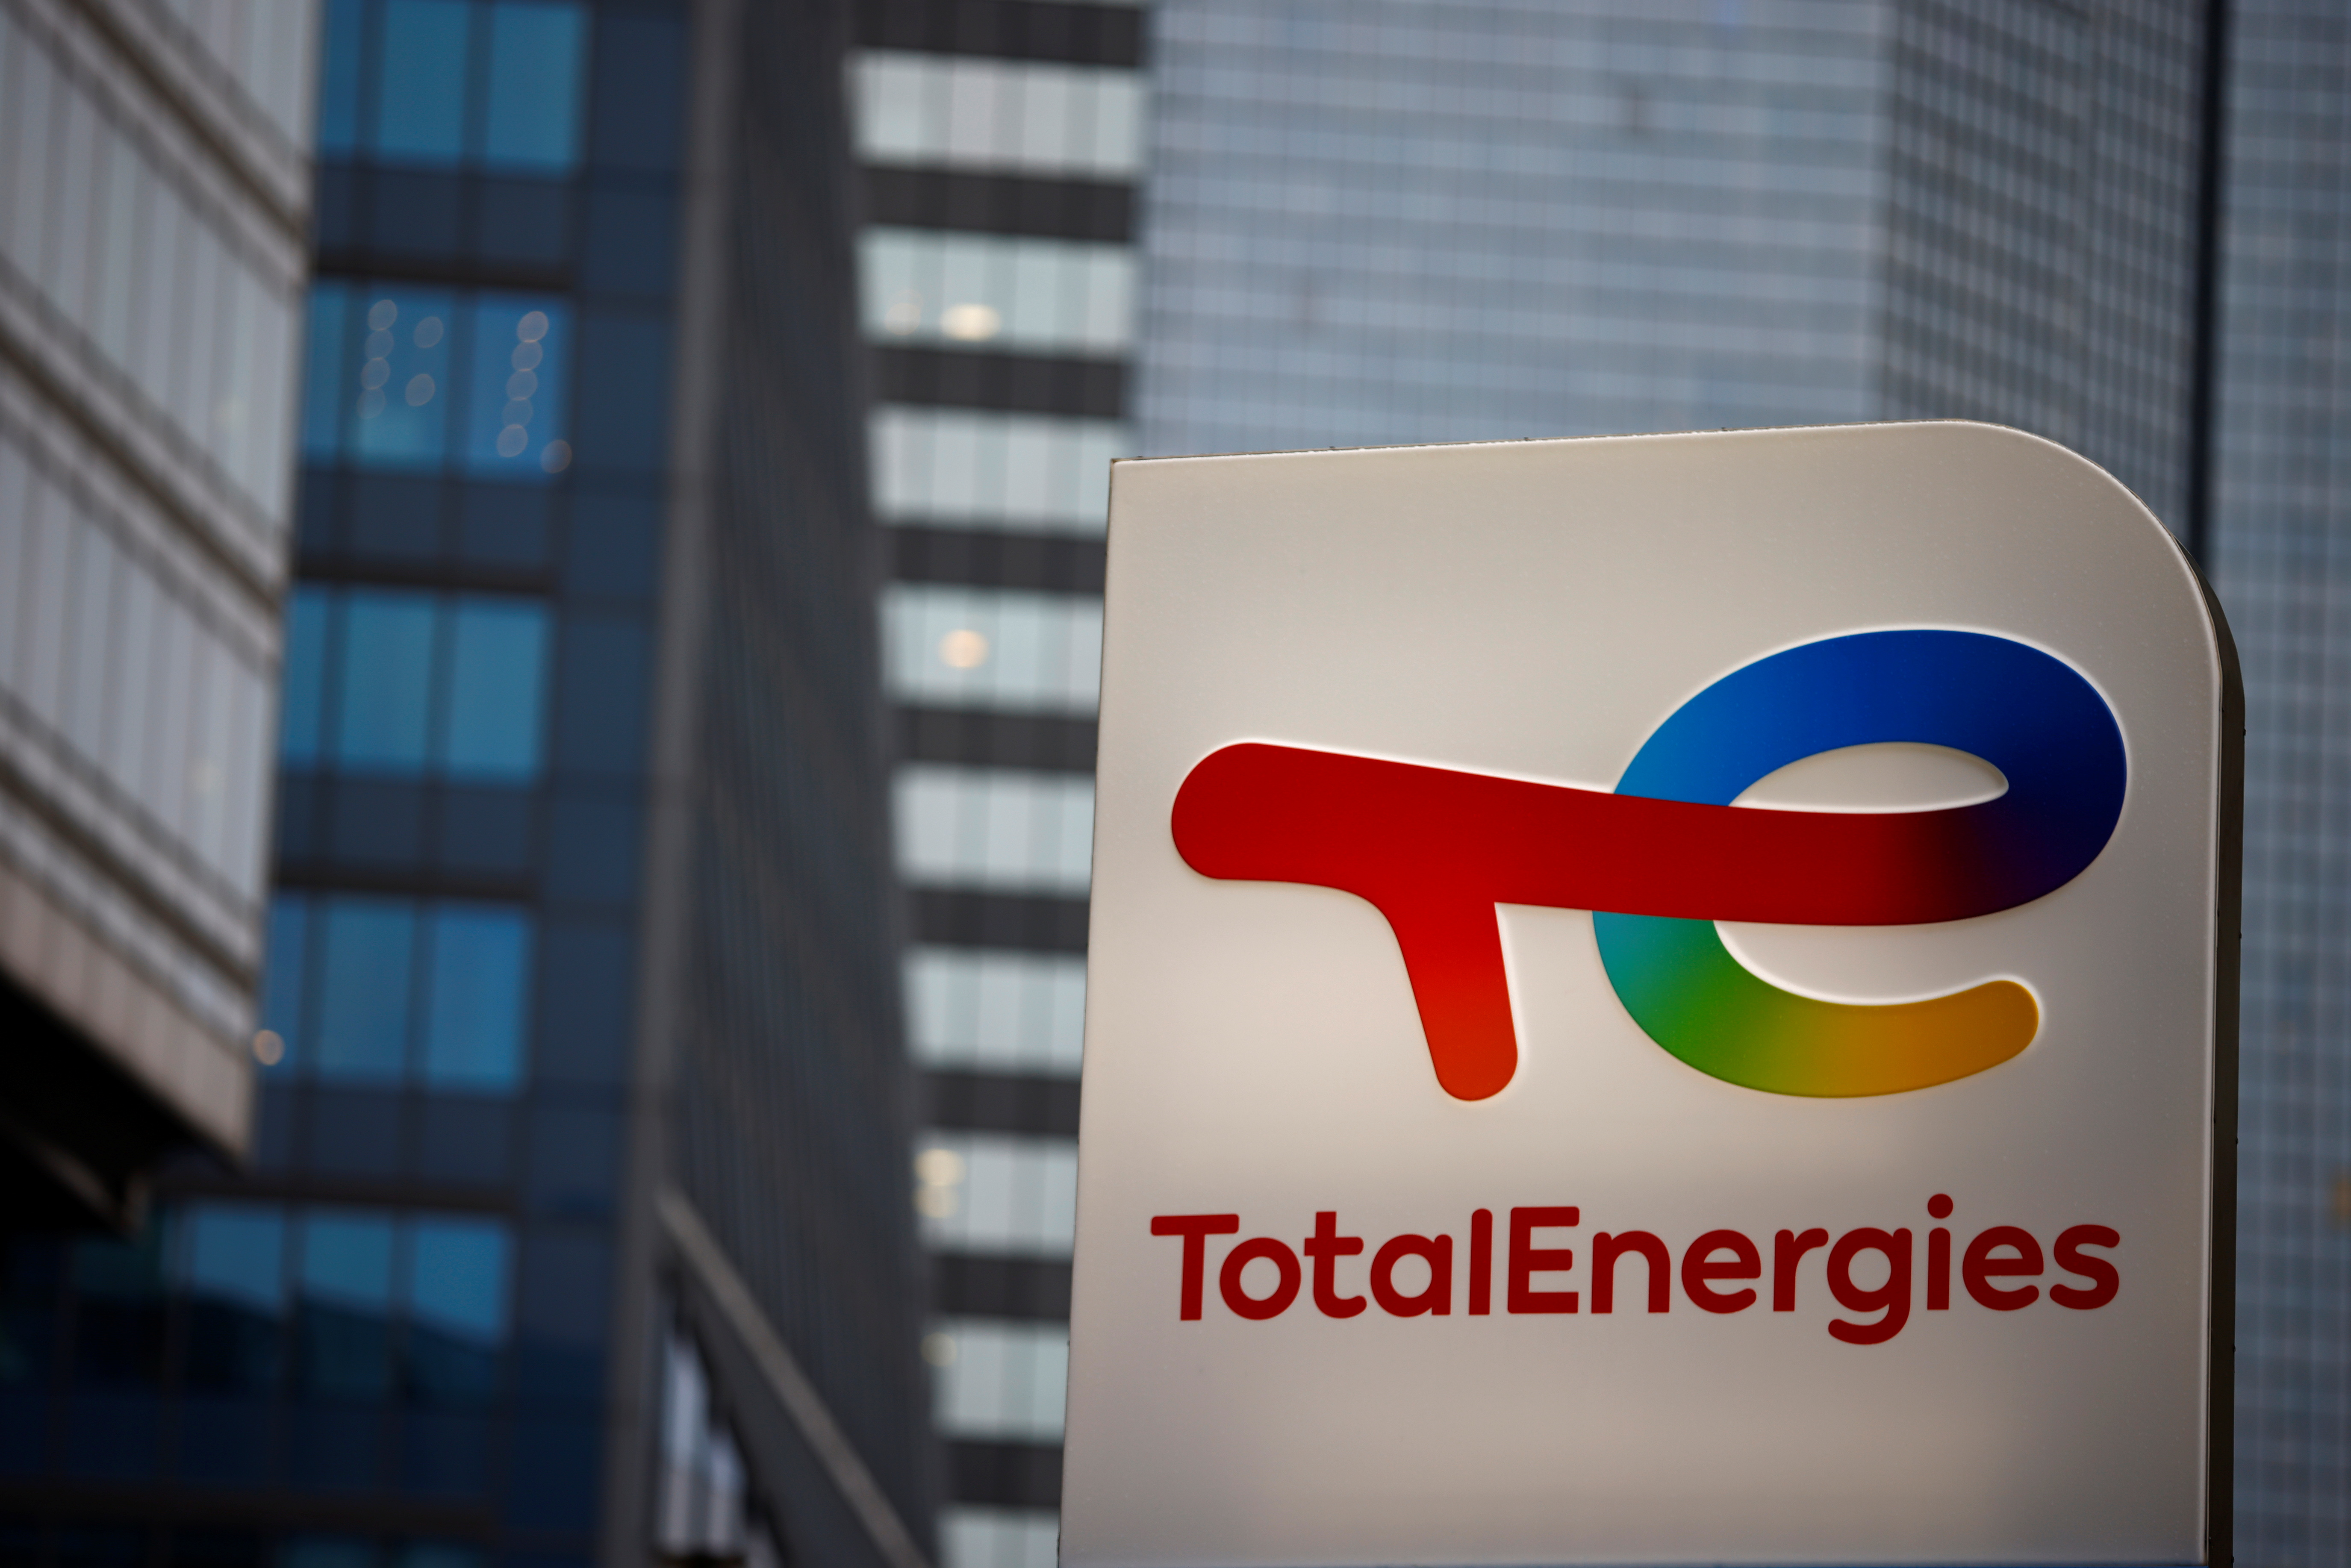 The logo of French oil and gas company TotalEnergies is pictured at an electric car charging station in Courbevoie